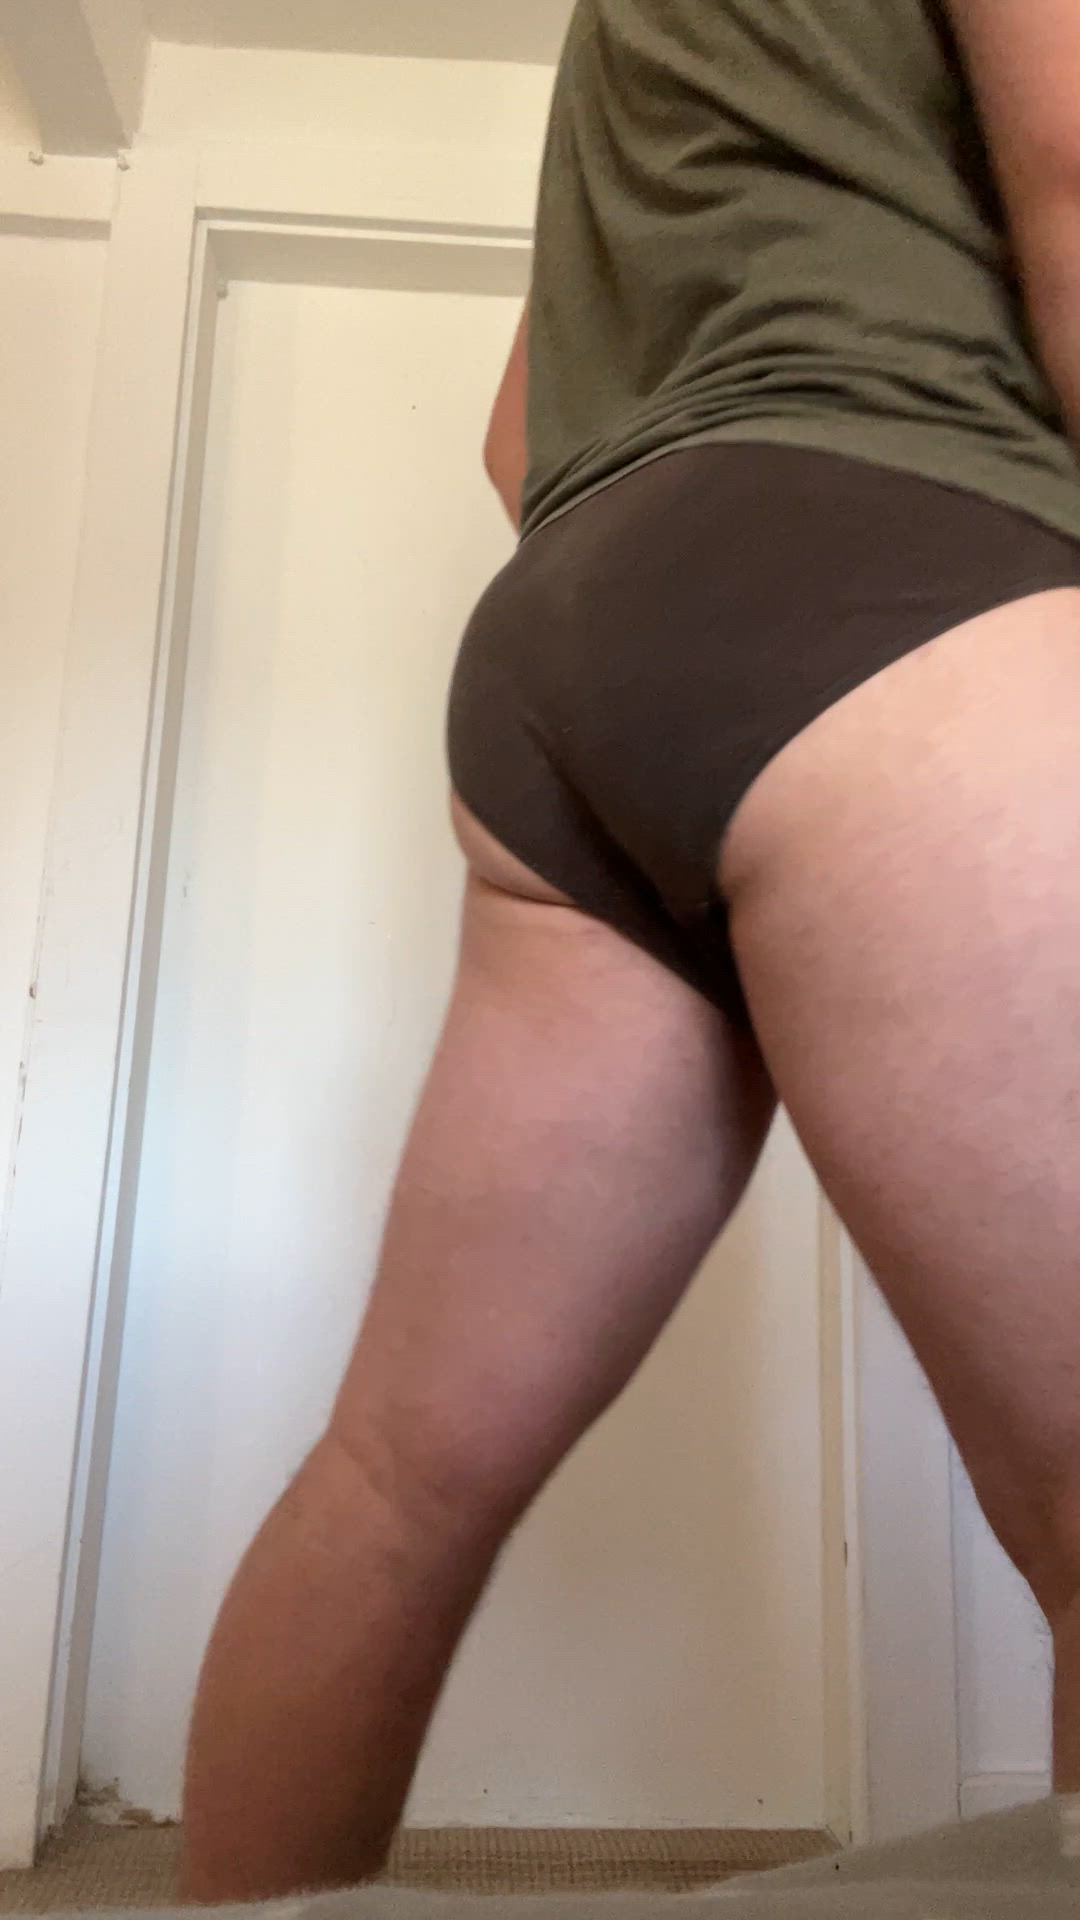 Ass porn video with onlyfans model Rayblew <strong>@rayblew</strong>